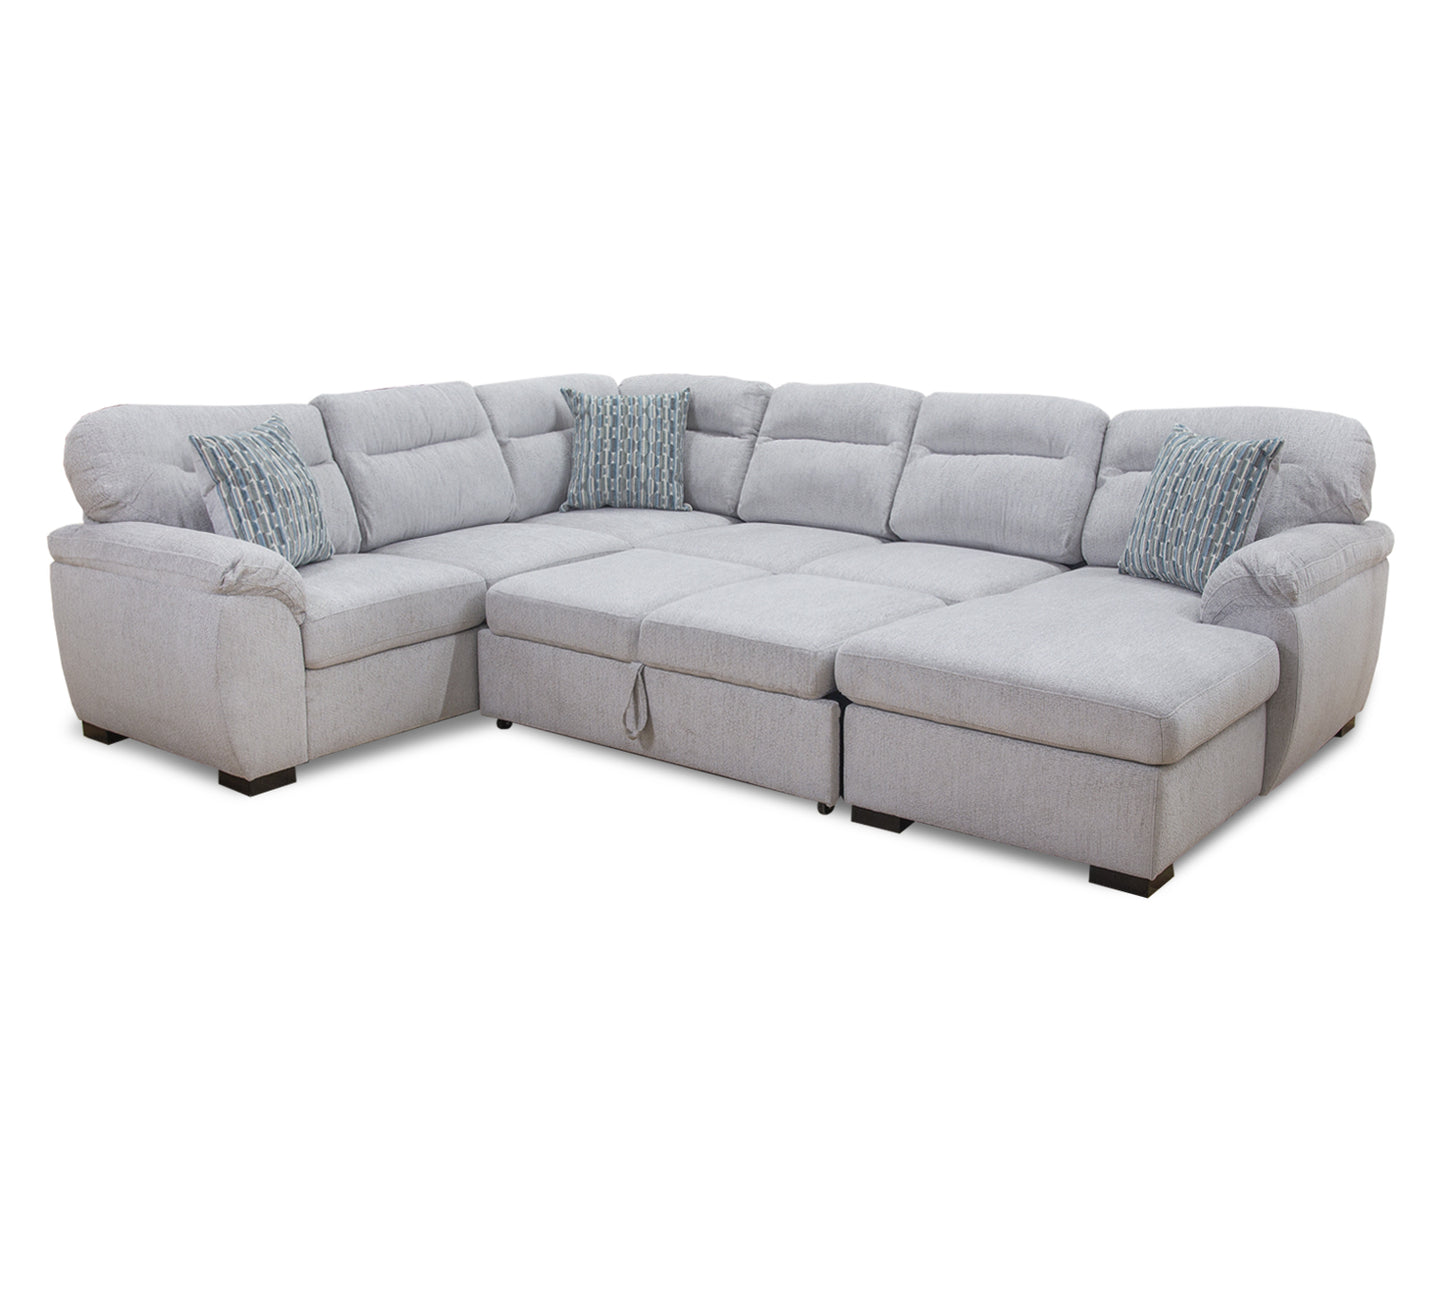 Kelly 3 Piece Pop-Up Sectional